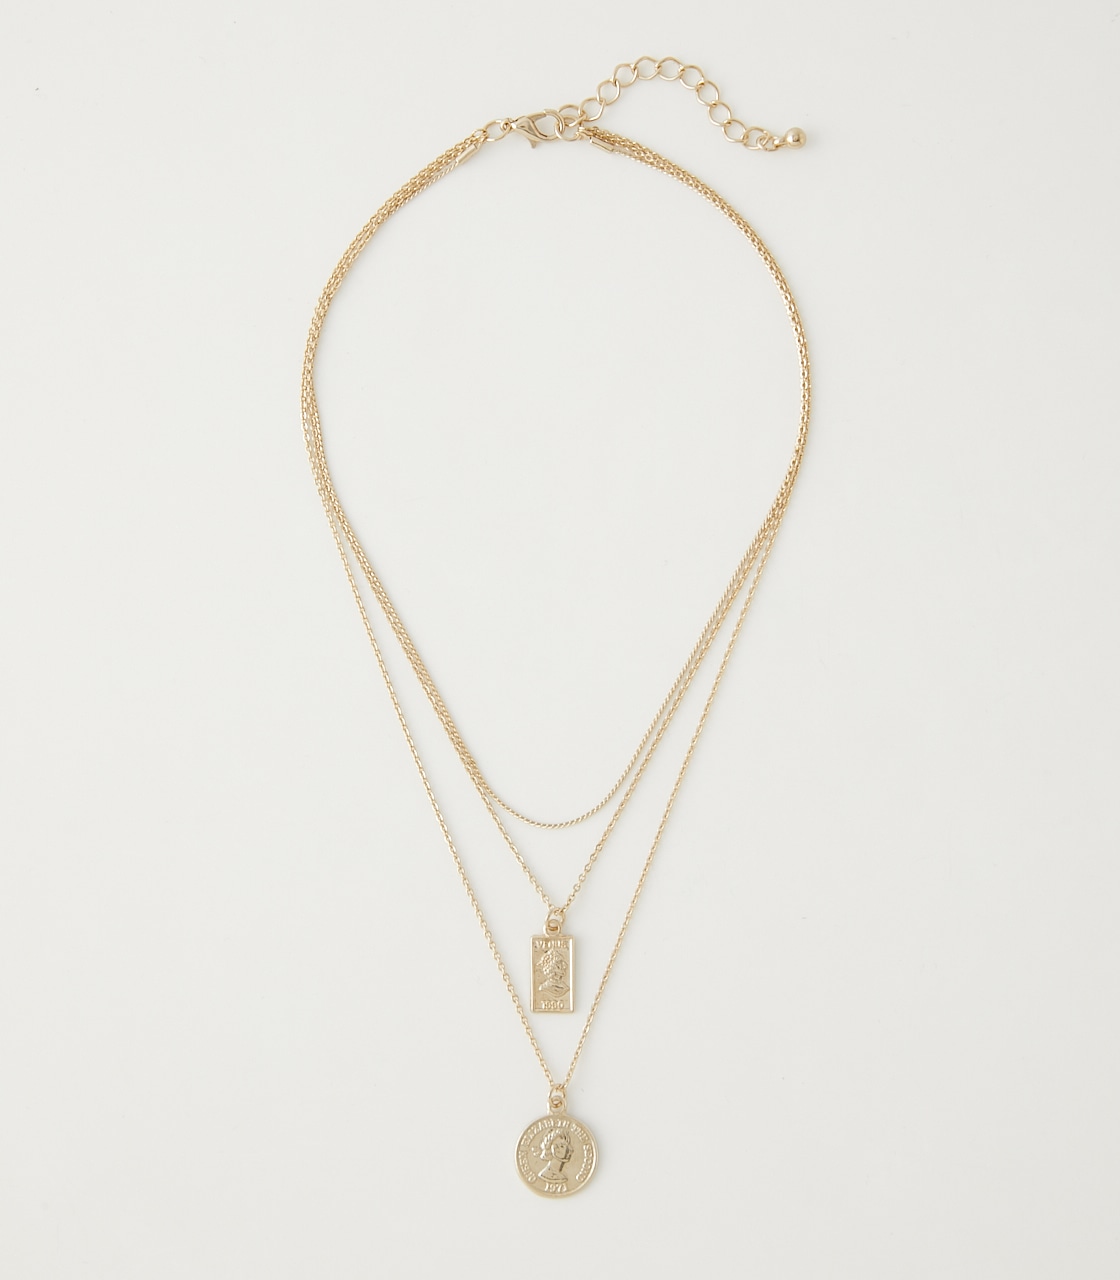 COIN THREE-STRAND NECKLACE/コインスリーストランドネックレス【MOOK54掲載 90359】 詳細画像 L/GLD 1